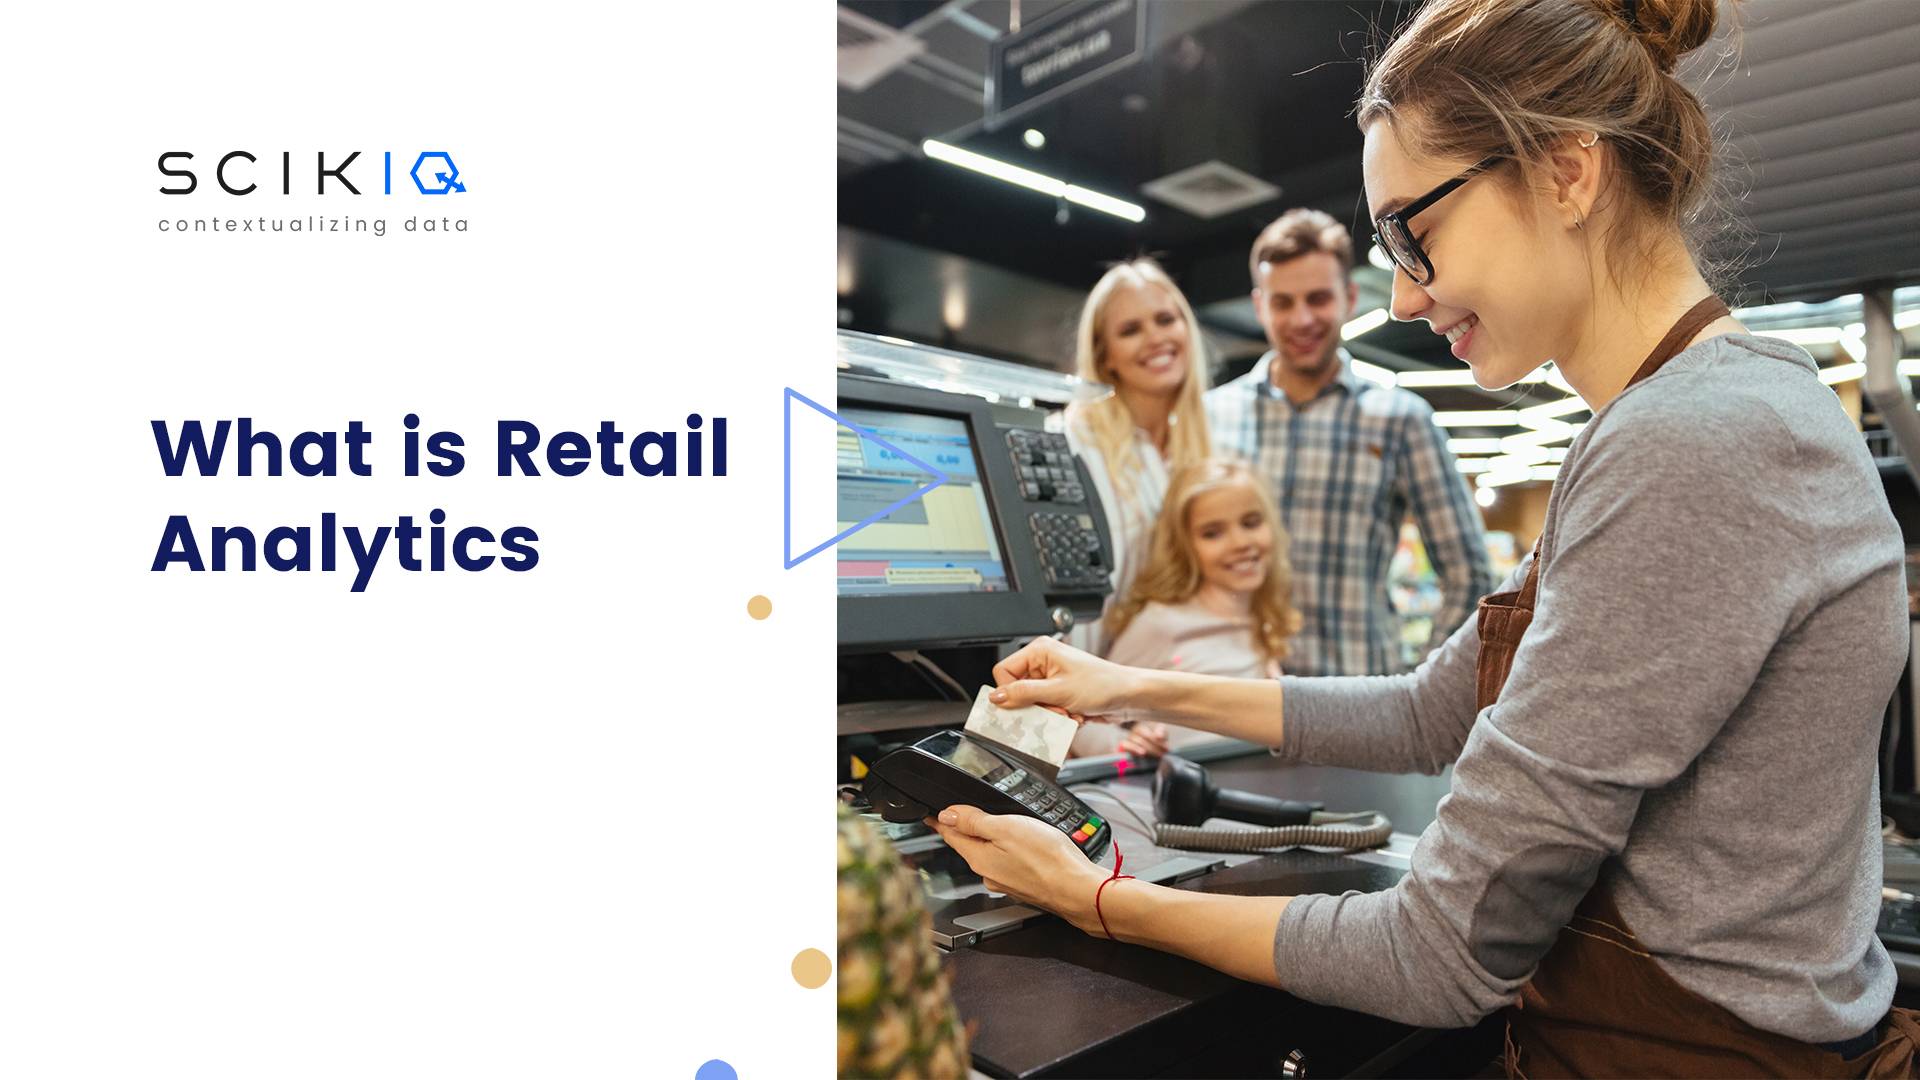 What is Retail Analytics? How it Helps Achieve Customer 360